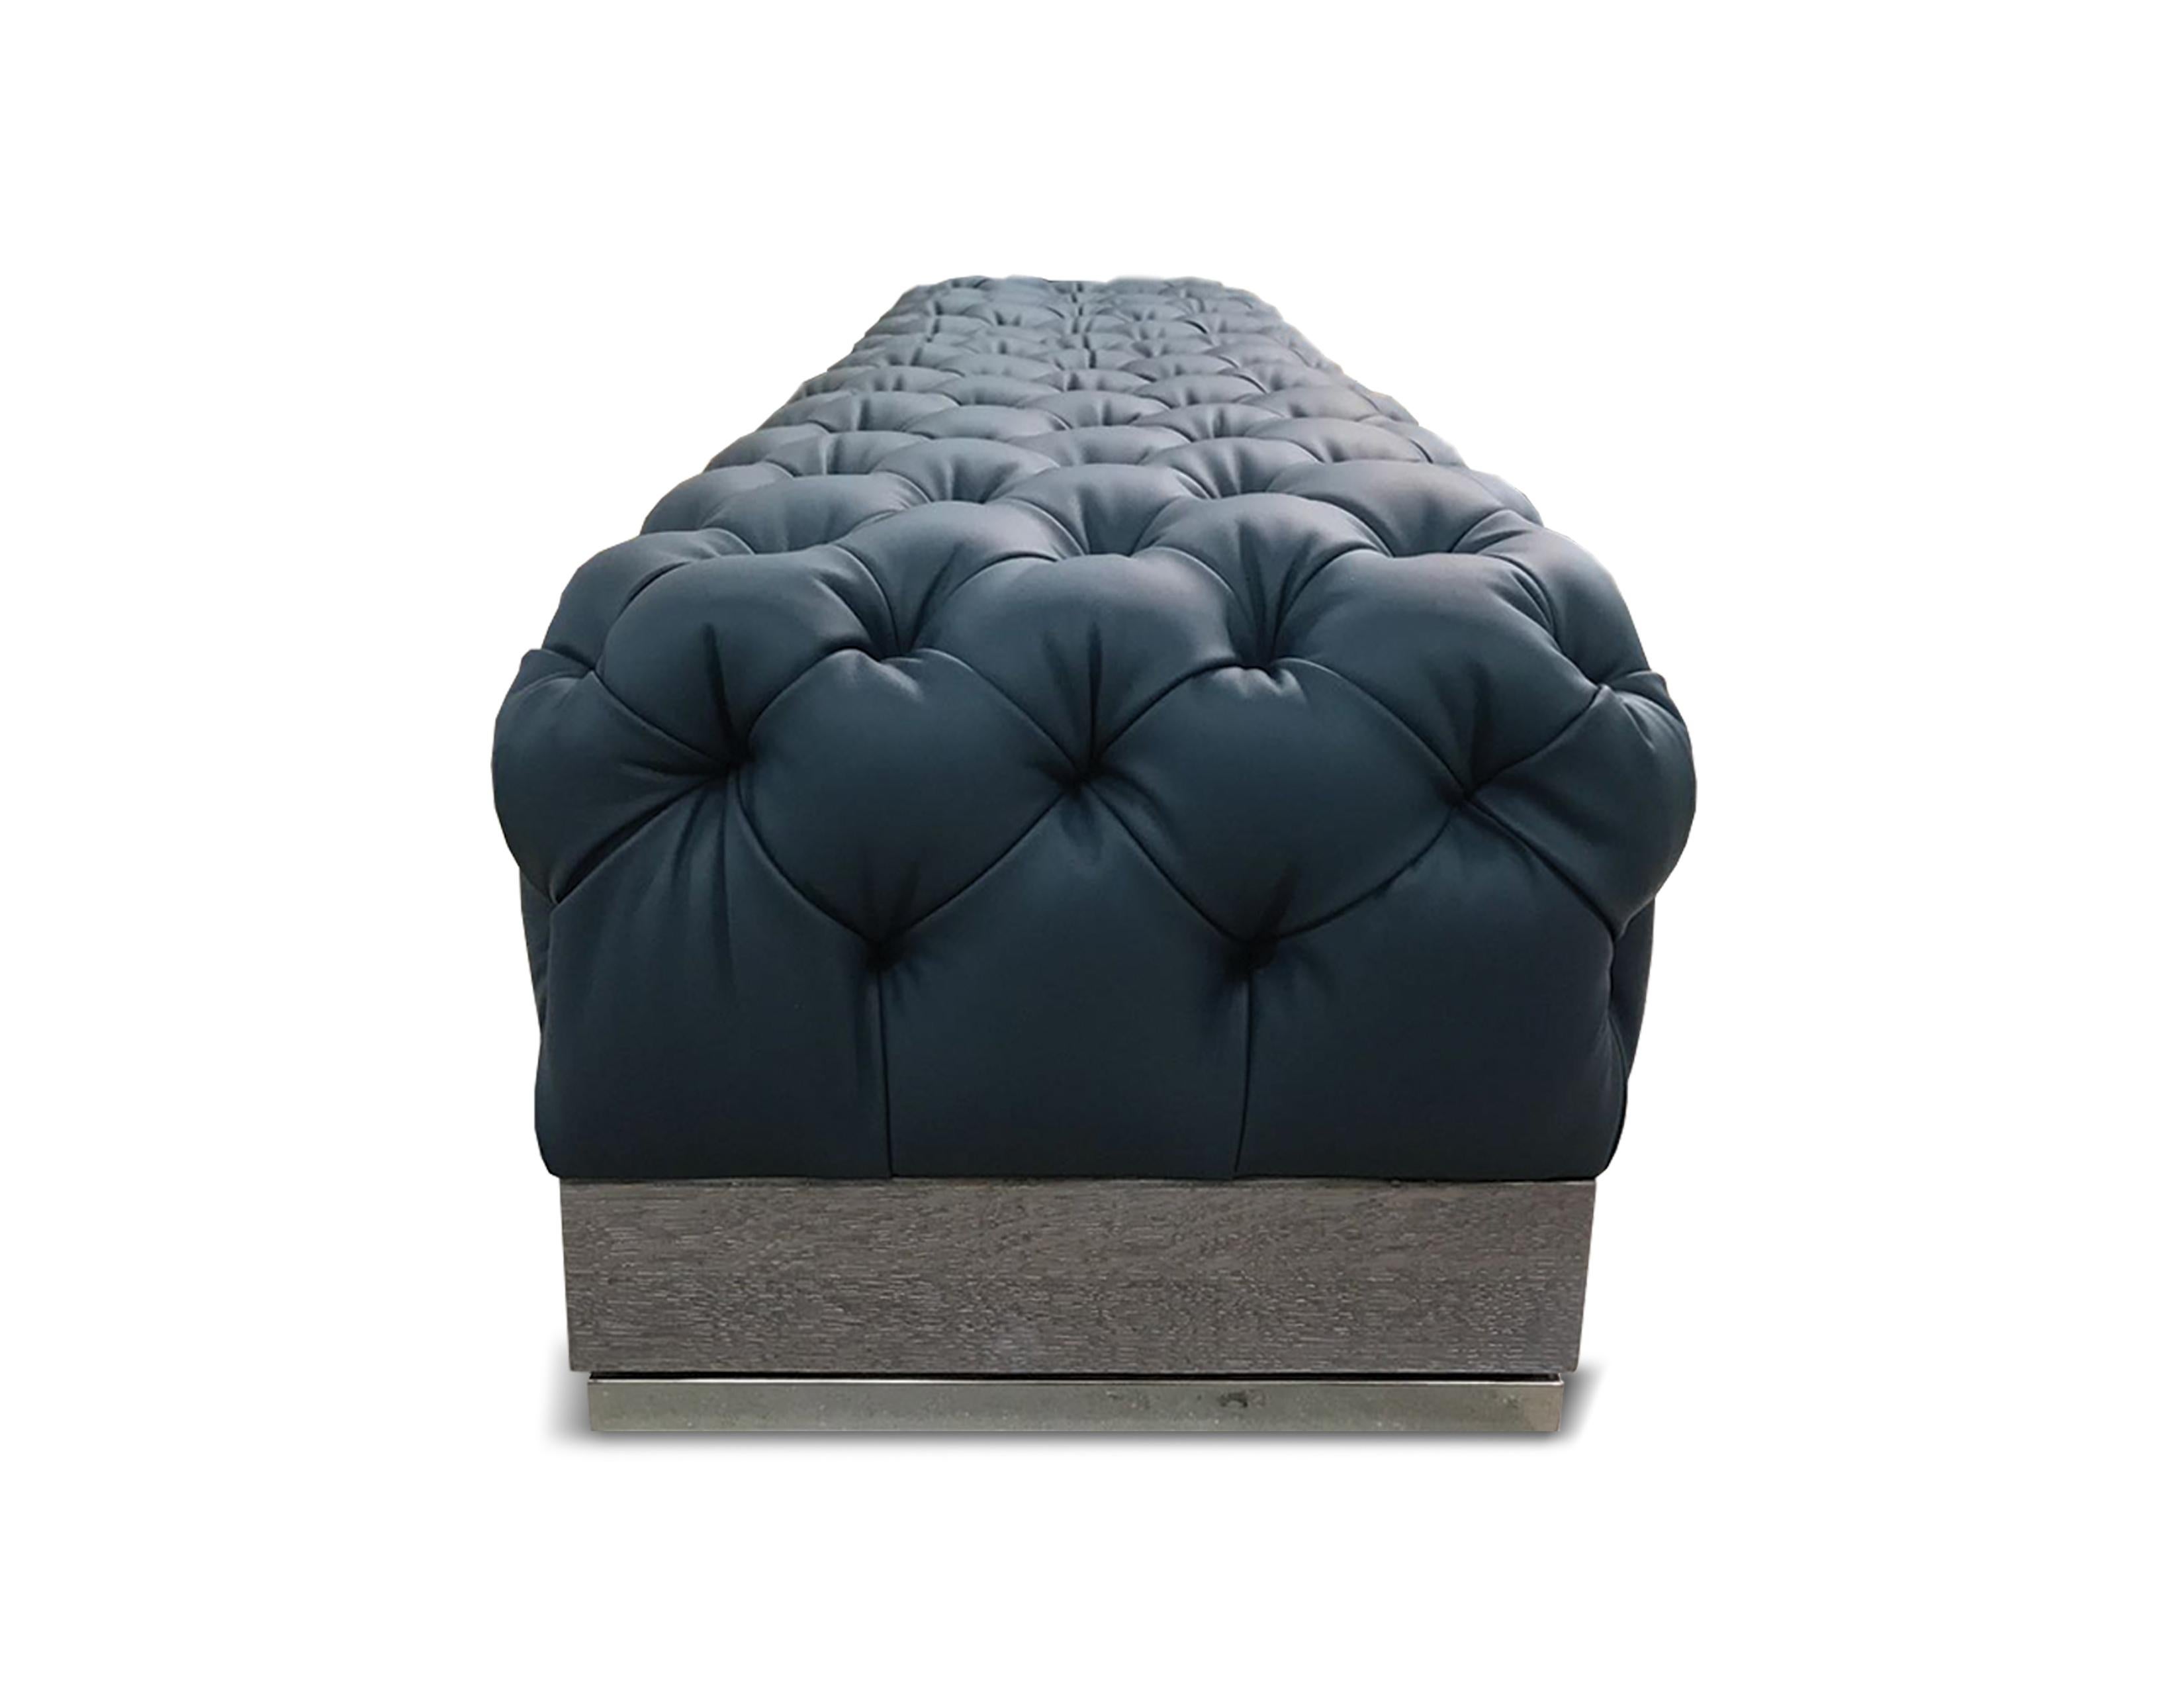 NUBE Ottoman: The ottoman is inspired by a cloud and gives a contemporary twist to the classic Capitonné. Our artisans’ mastery of this special technique shows in the skillfully tufted seating grounding on a European oak frame with noble metal feet.